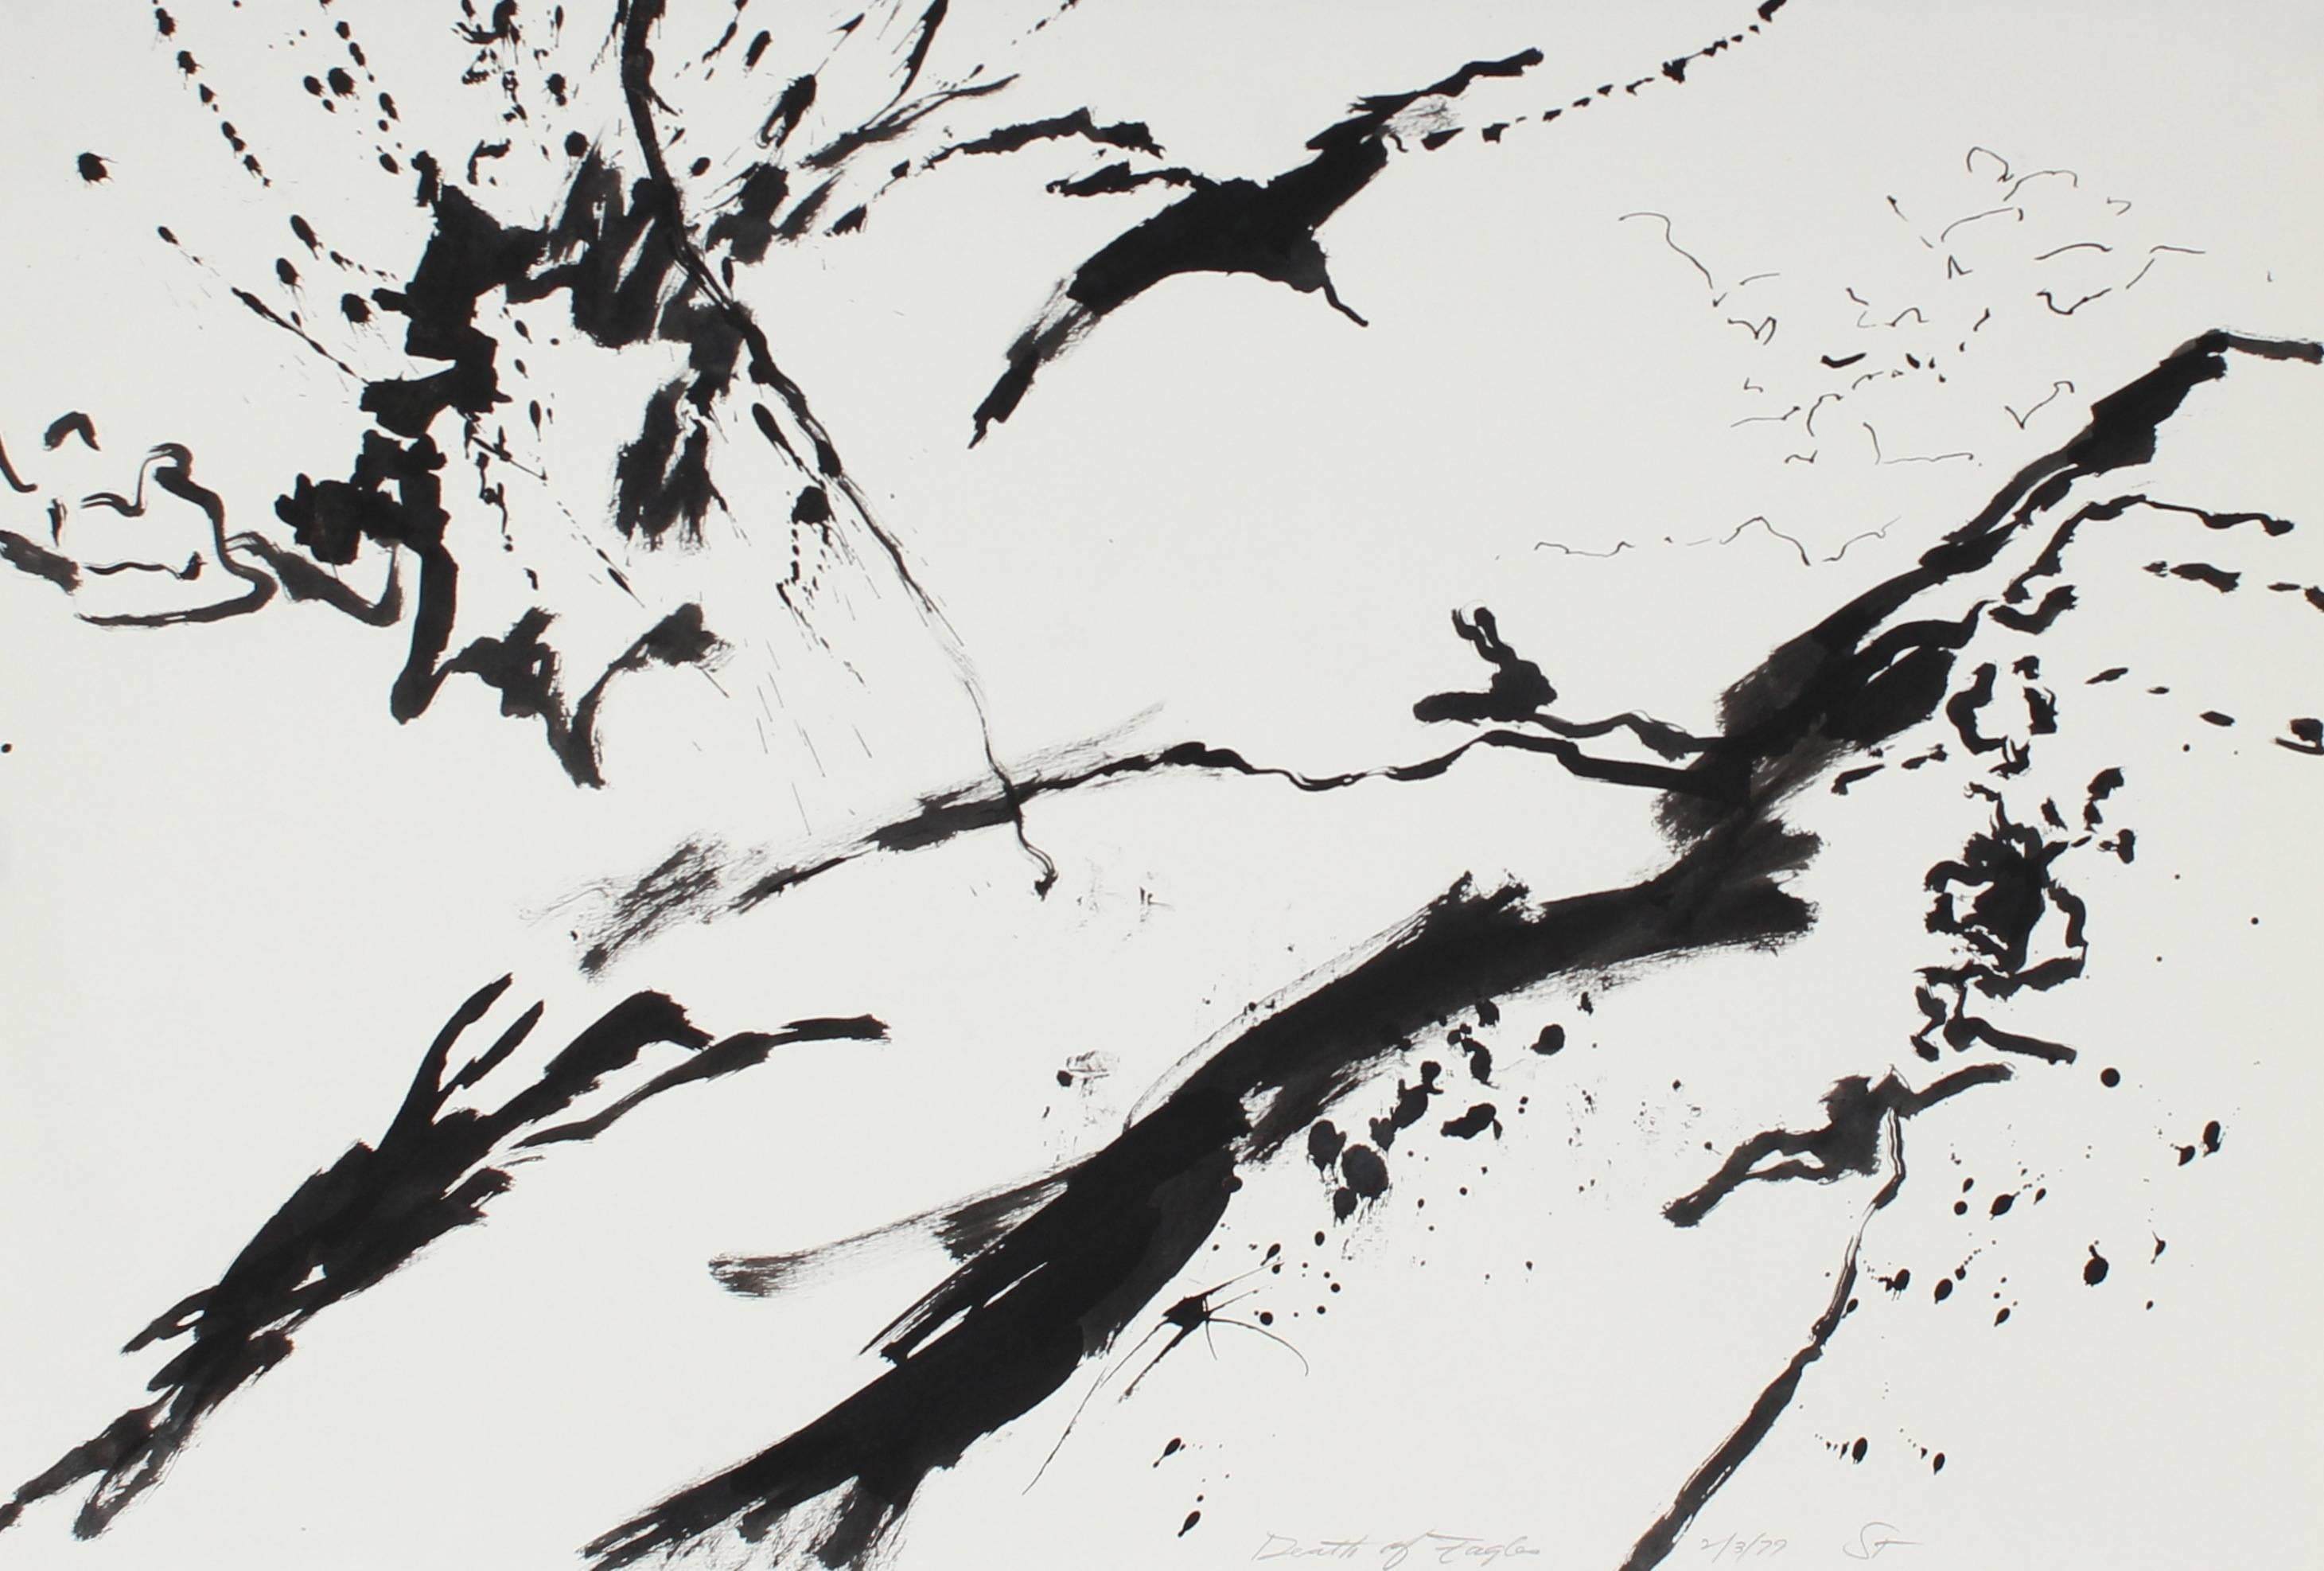 Seymour Tubis Abstract Painting - "Death of Eagles" Monochromatic Ink Drawing, 1979